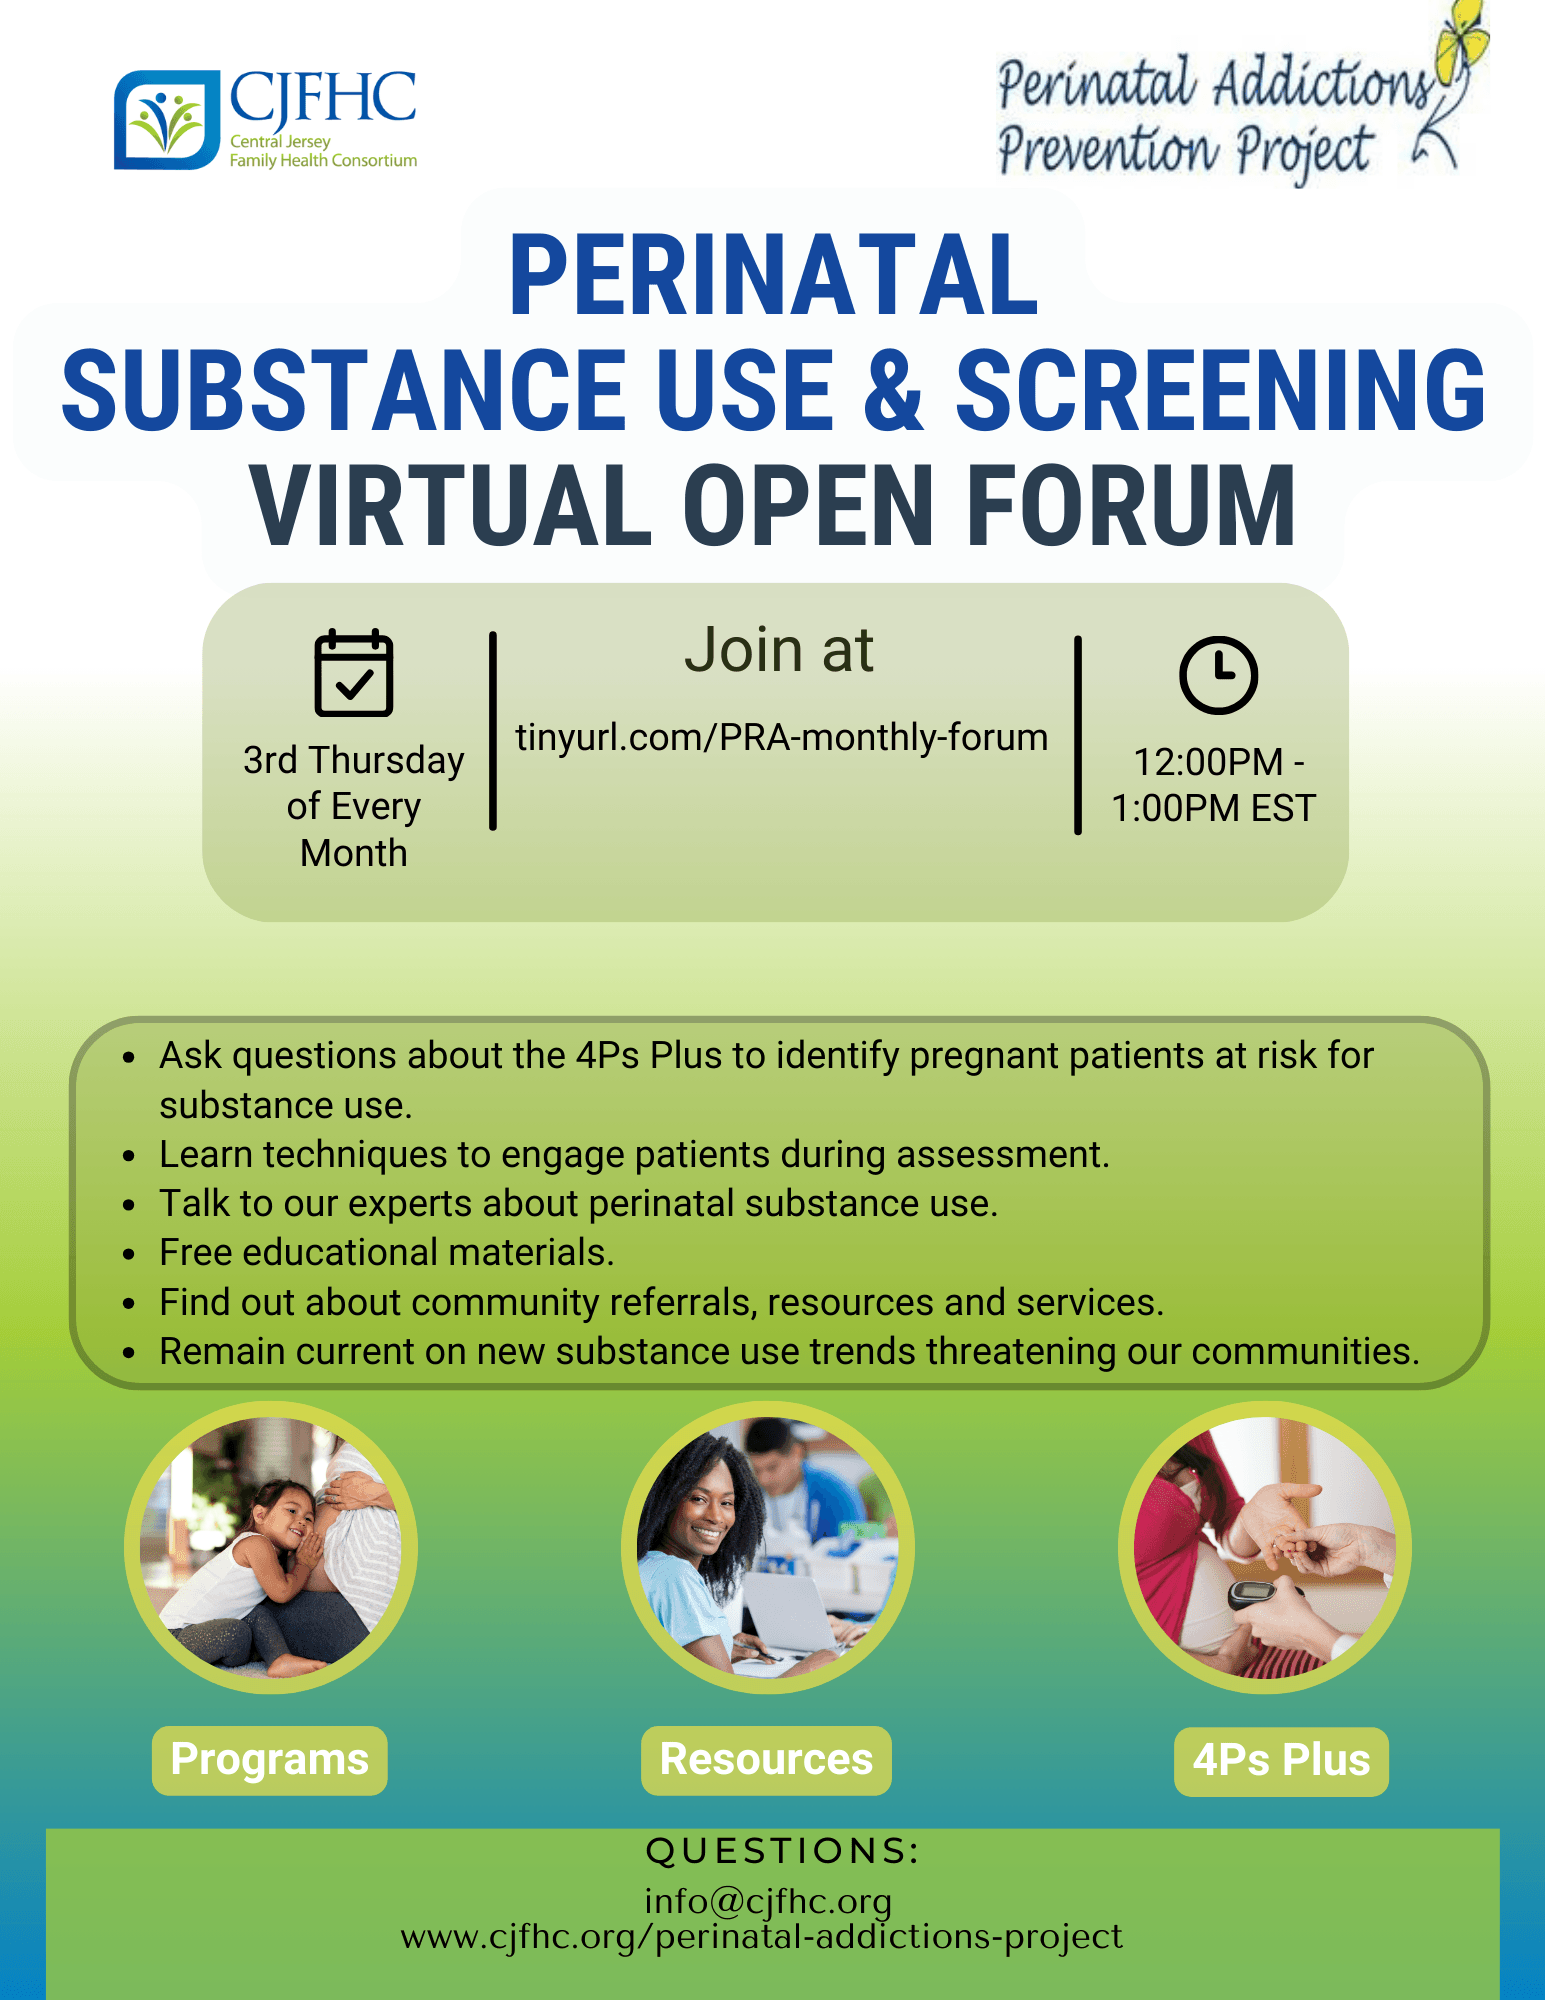 Perinatal Addiction Prevention Project Monthly Virtual Forum Continues